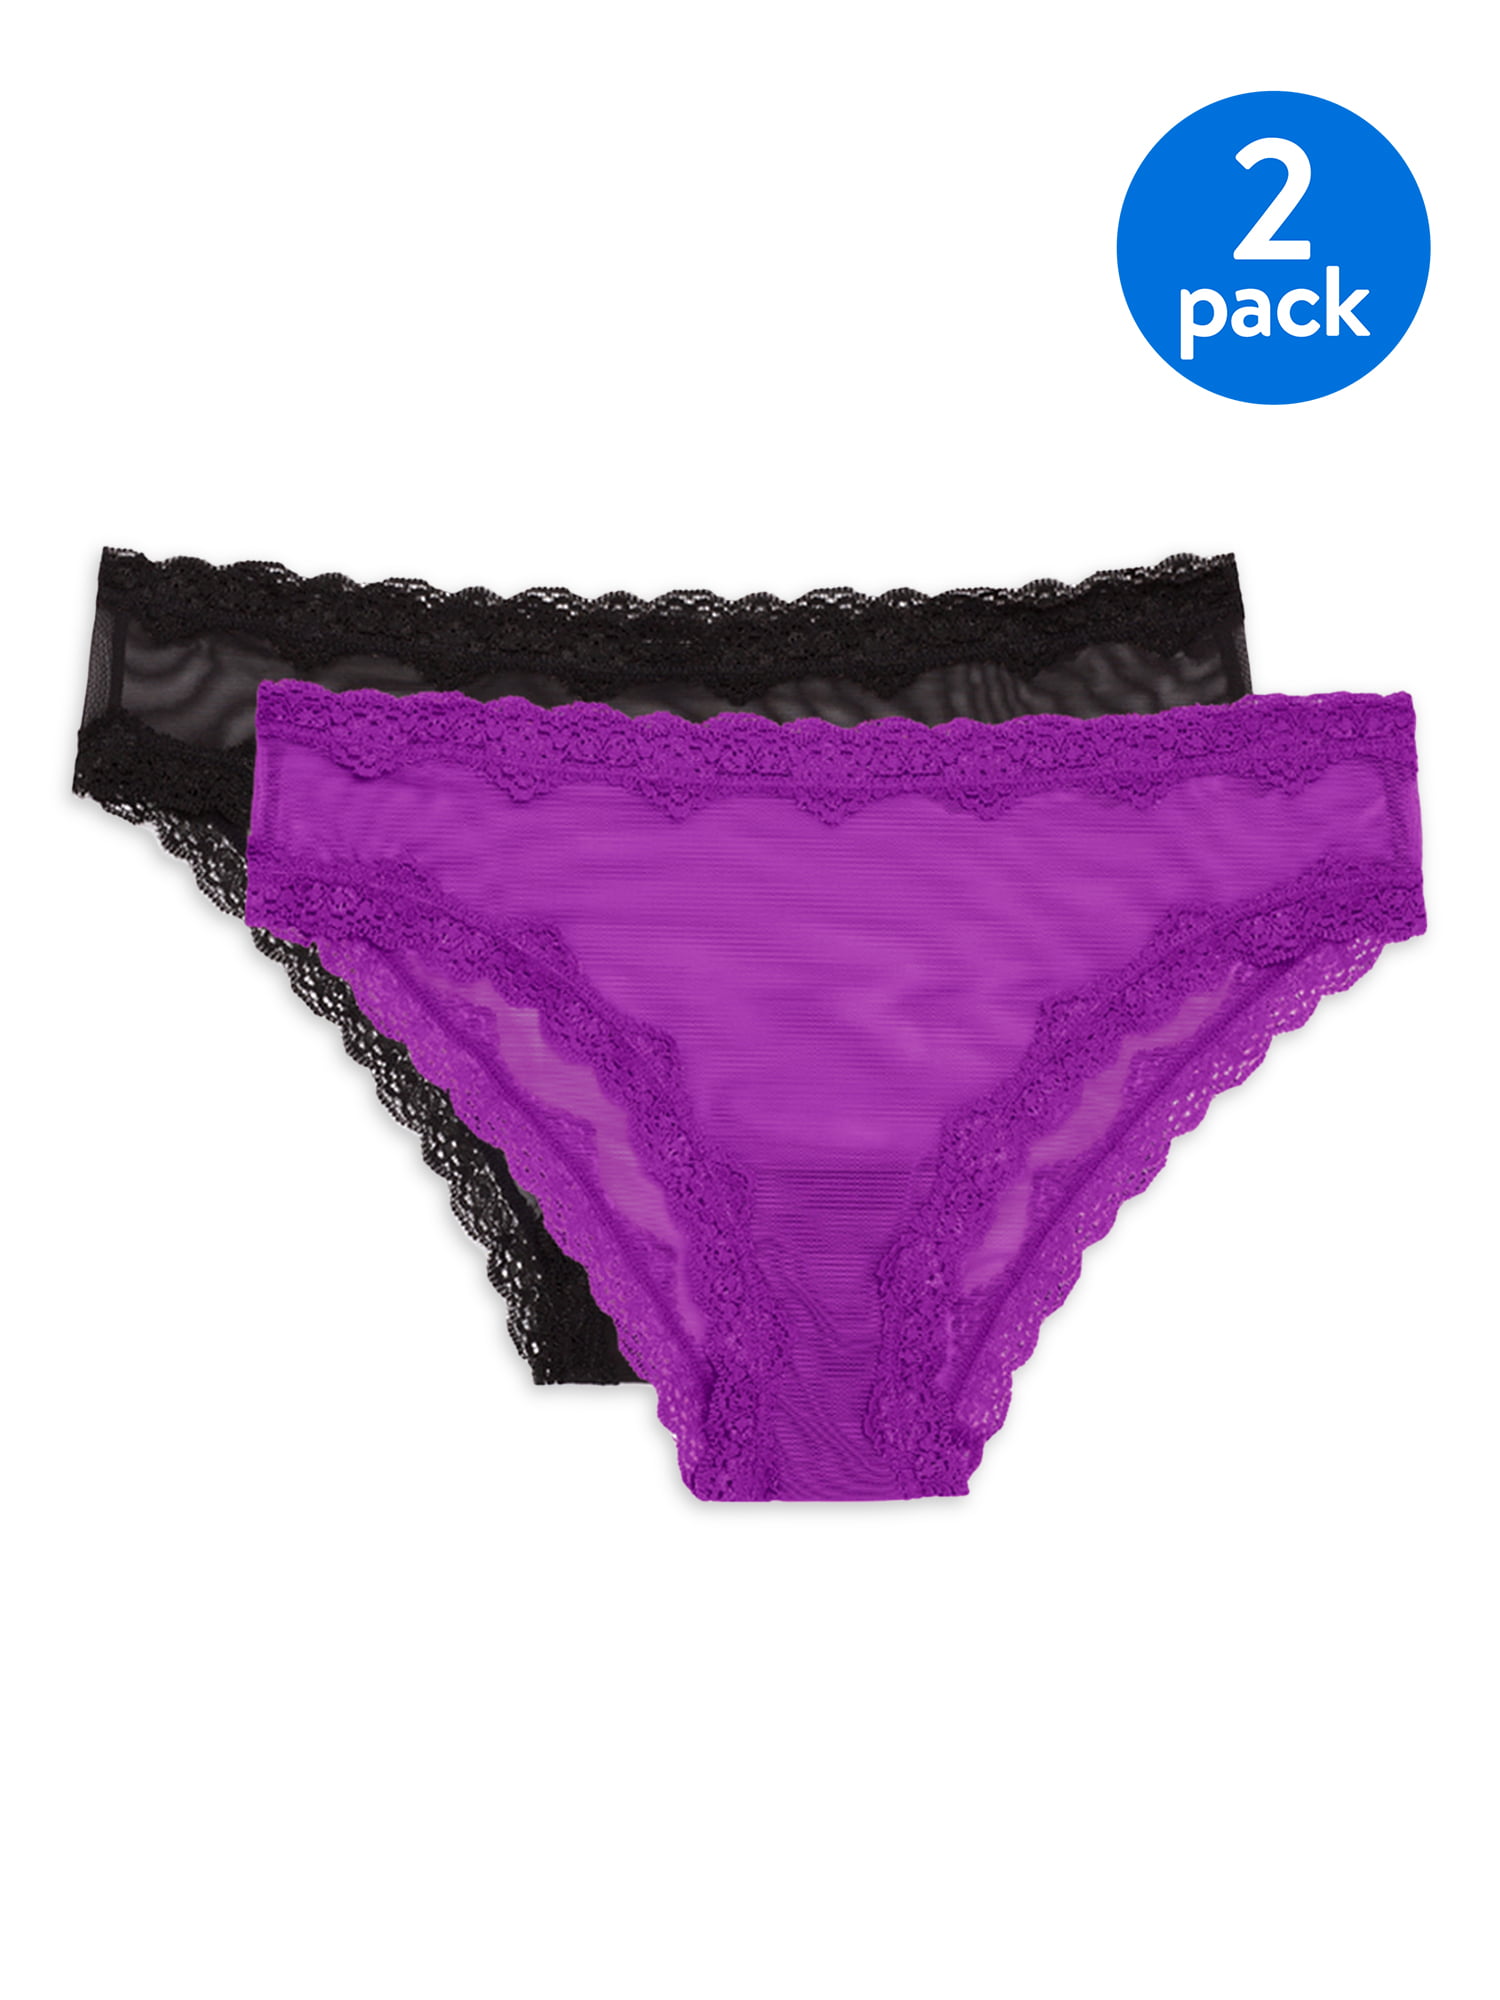 Smart & Sexy Women's Lace Trim Cheeky Panties, 2-pack, Style-SA1377 